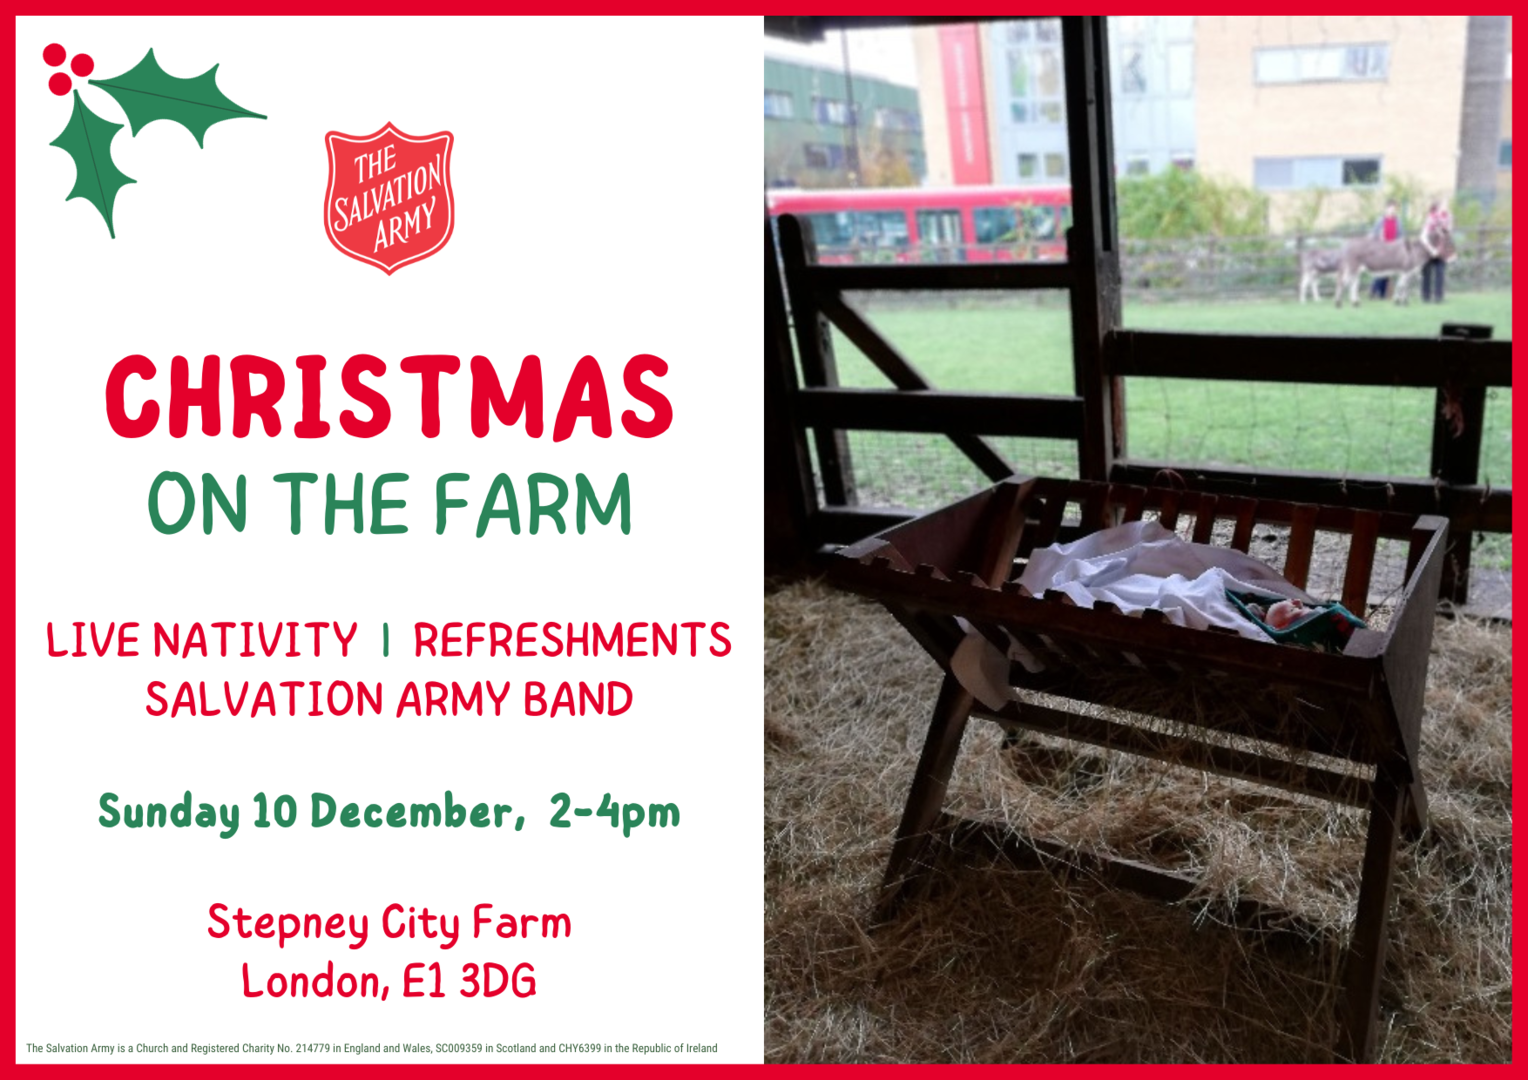 Advert for Christmas on the farm event on 10 December at 2pm